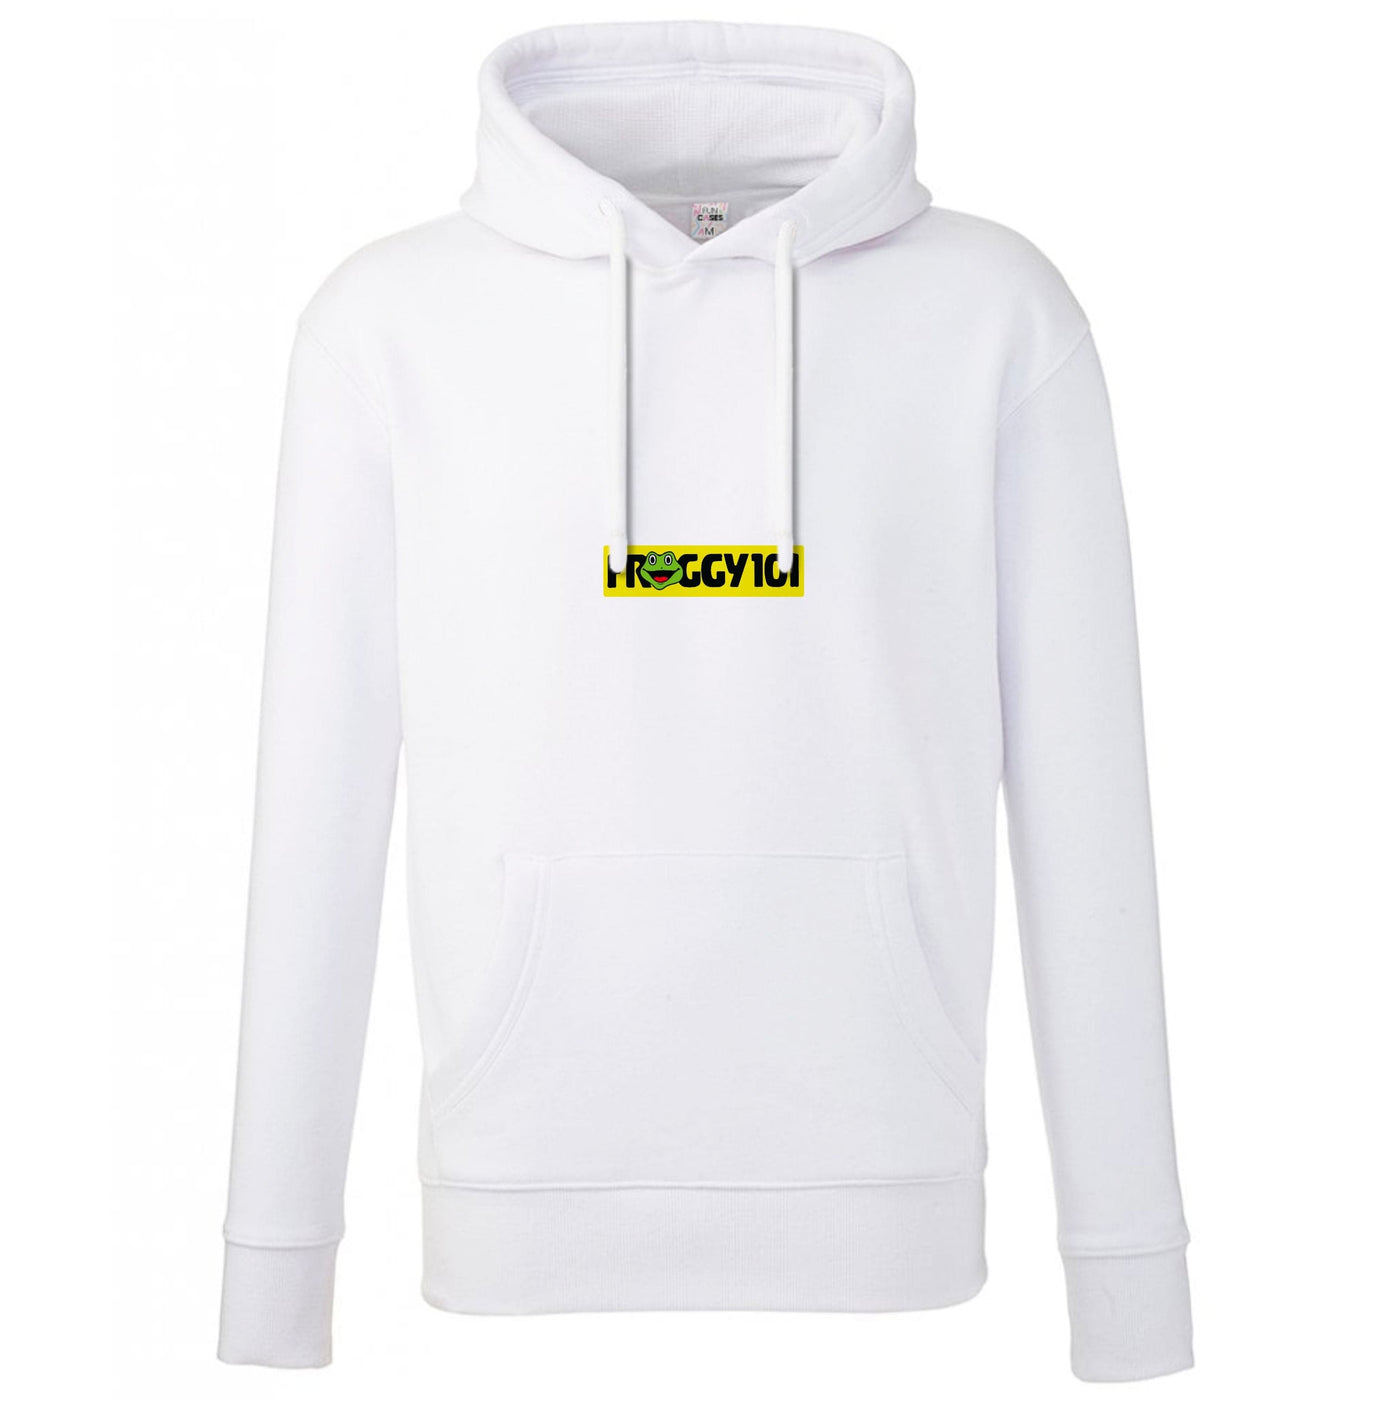 Froggy 101 - The Office Hoodie